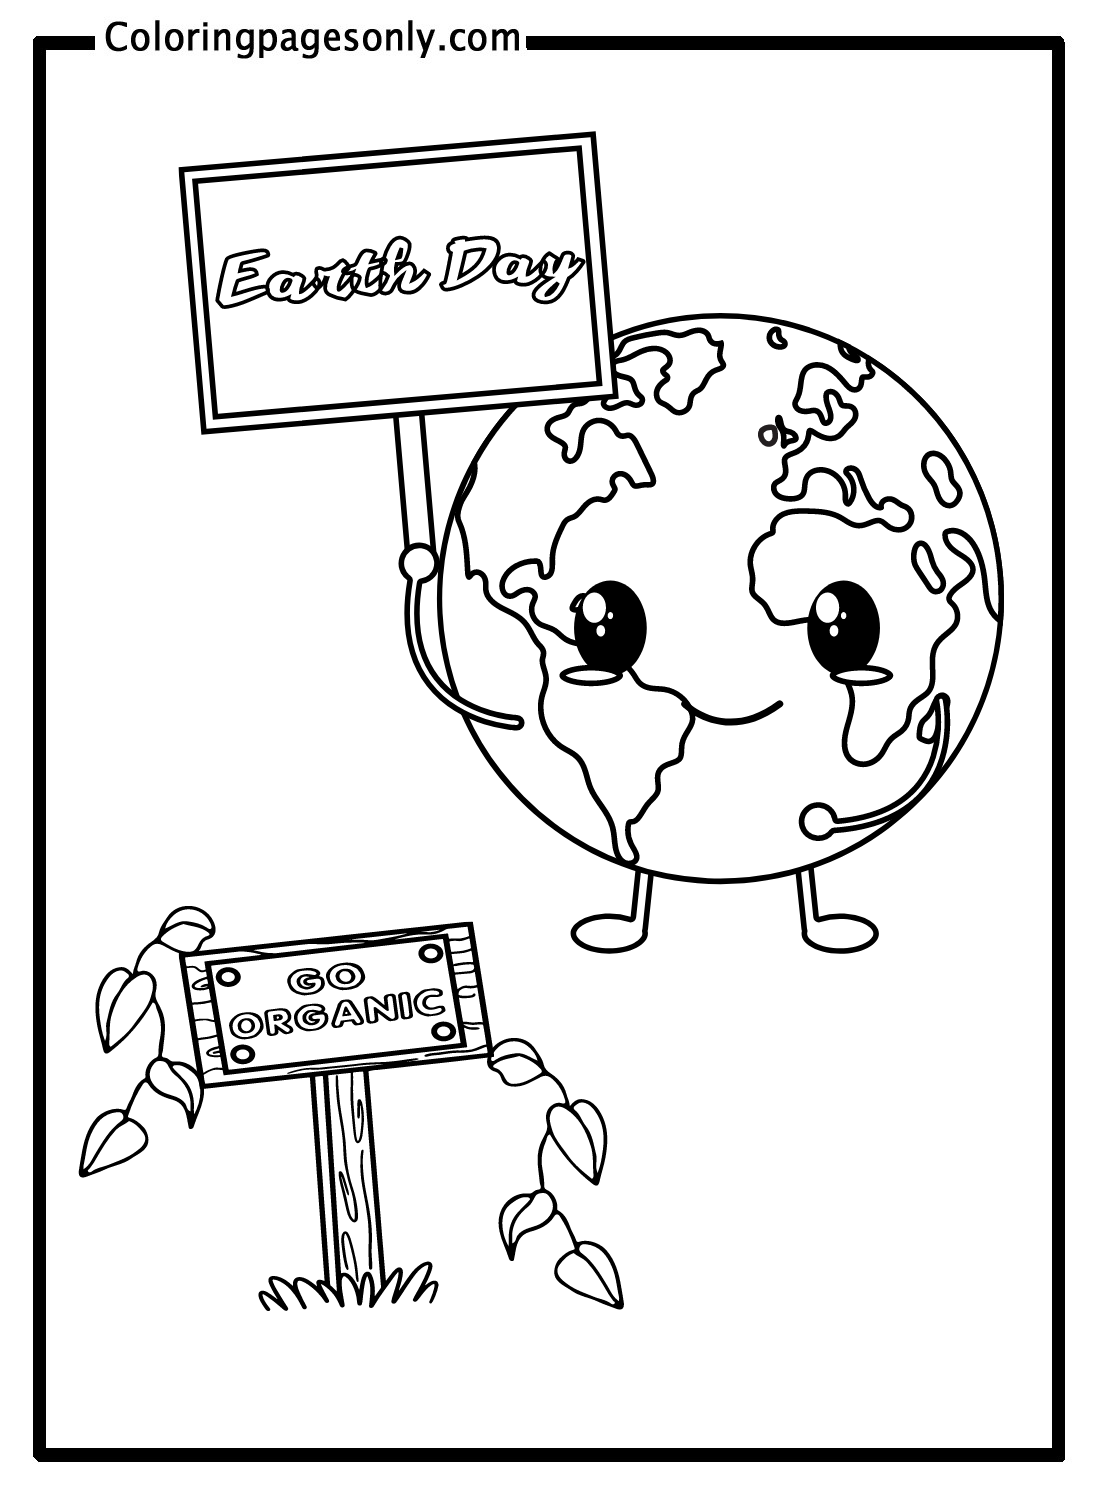 Earth Day Go Organic for Kids Coloring Page